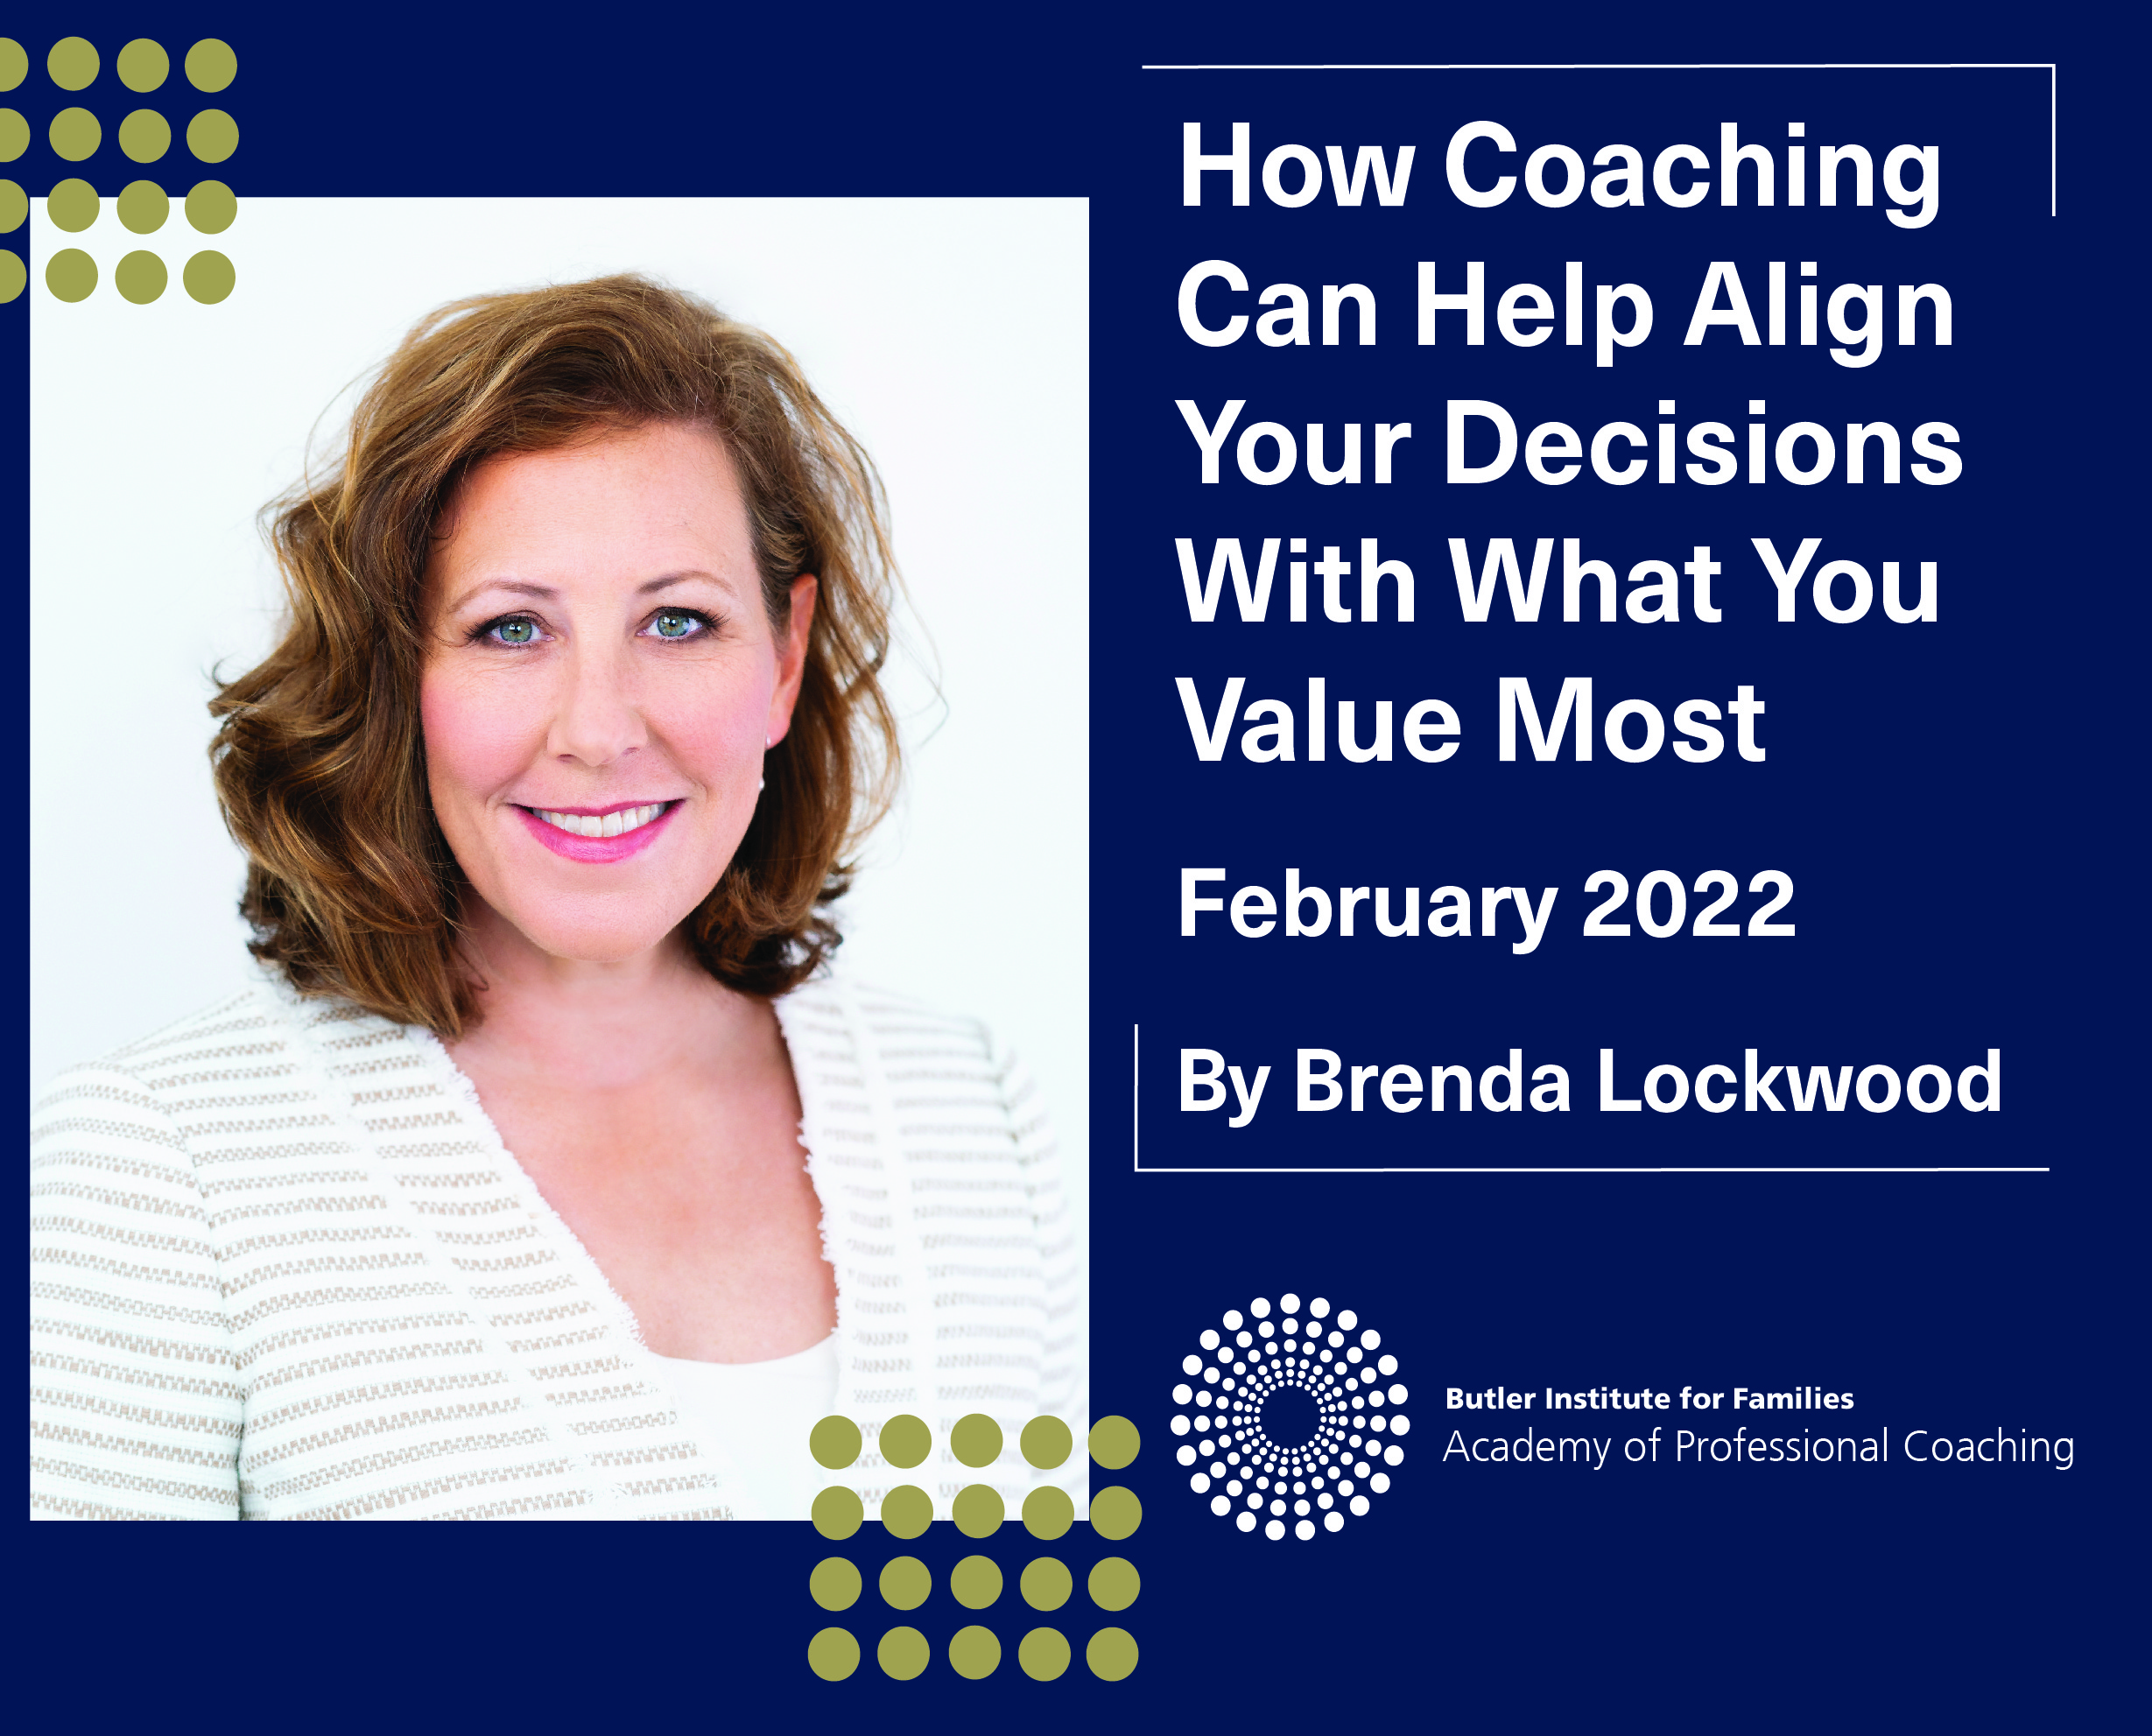 How Coaching Can Help Align Your Decisions With What You Value Most quote